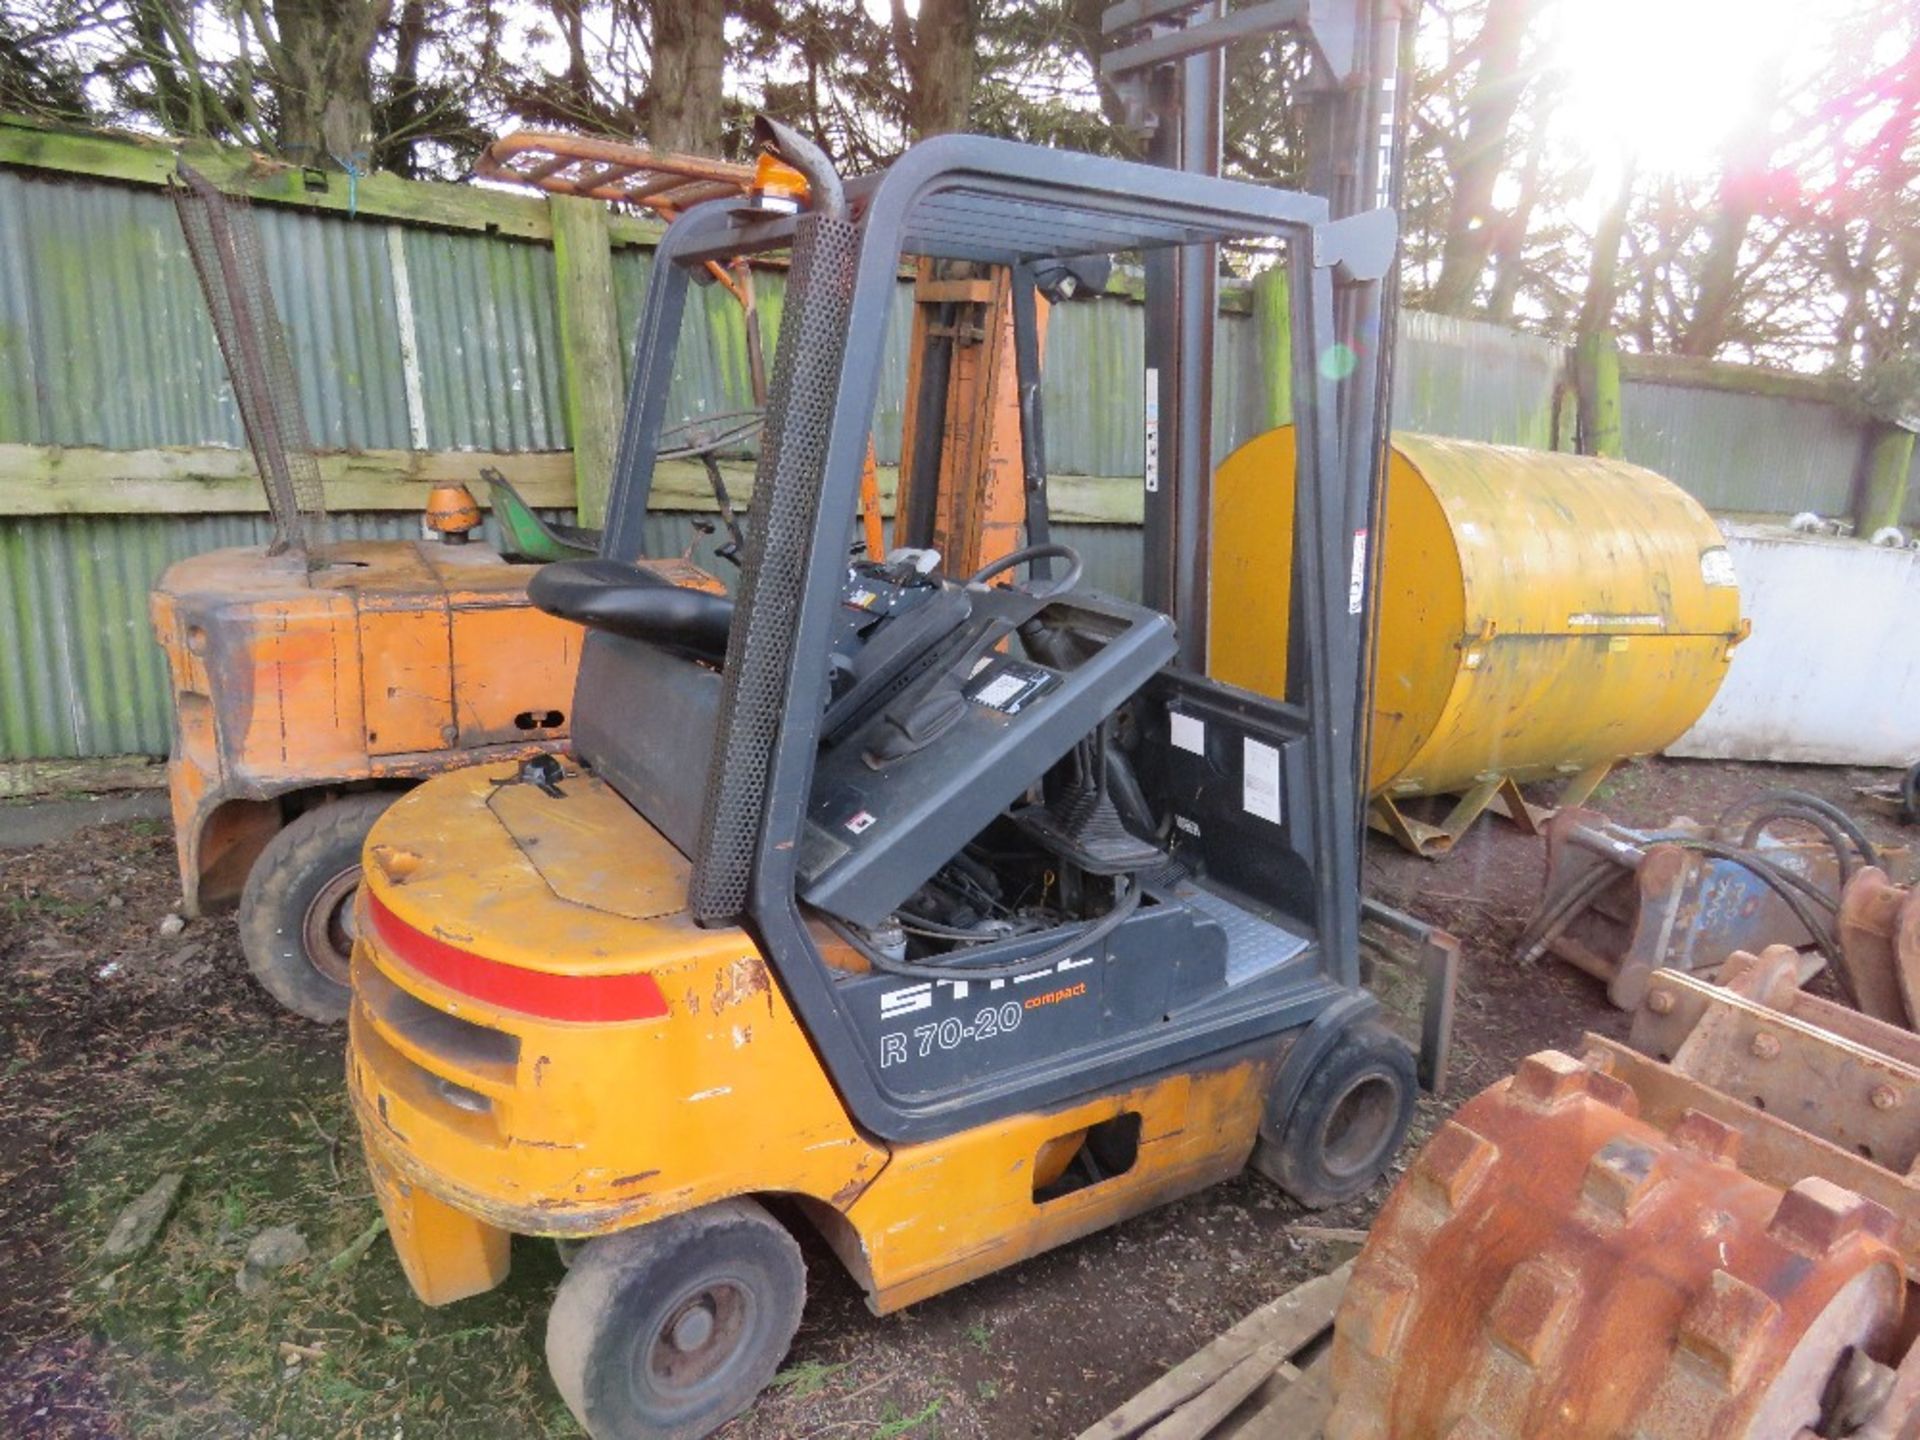 STILL R70-20 COMPACT DIESEL ENGINED FORKLIFT, SN:076001217. WEN TESTED WAS SEEN TO START, RUN AND LI - Image 5 of 6